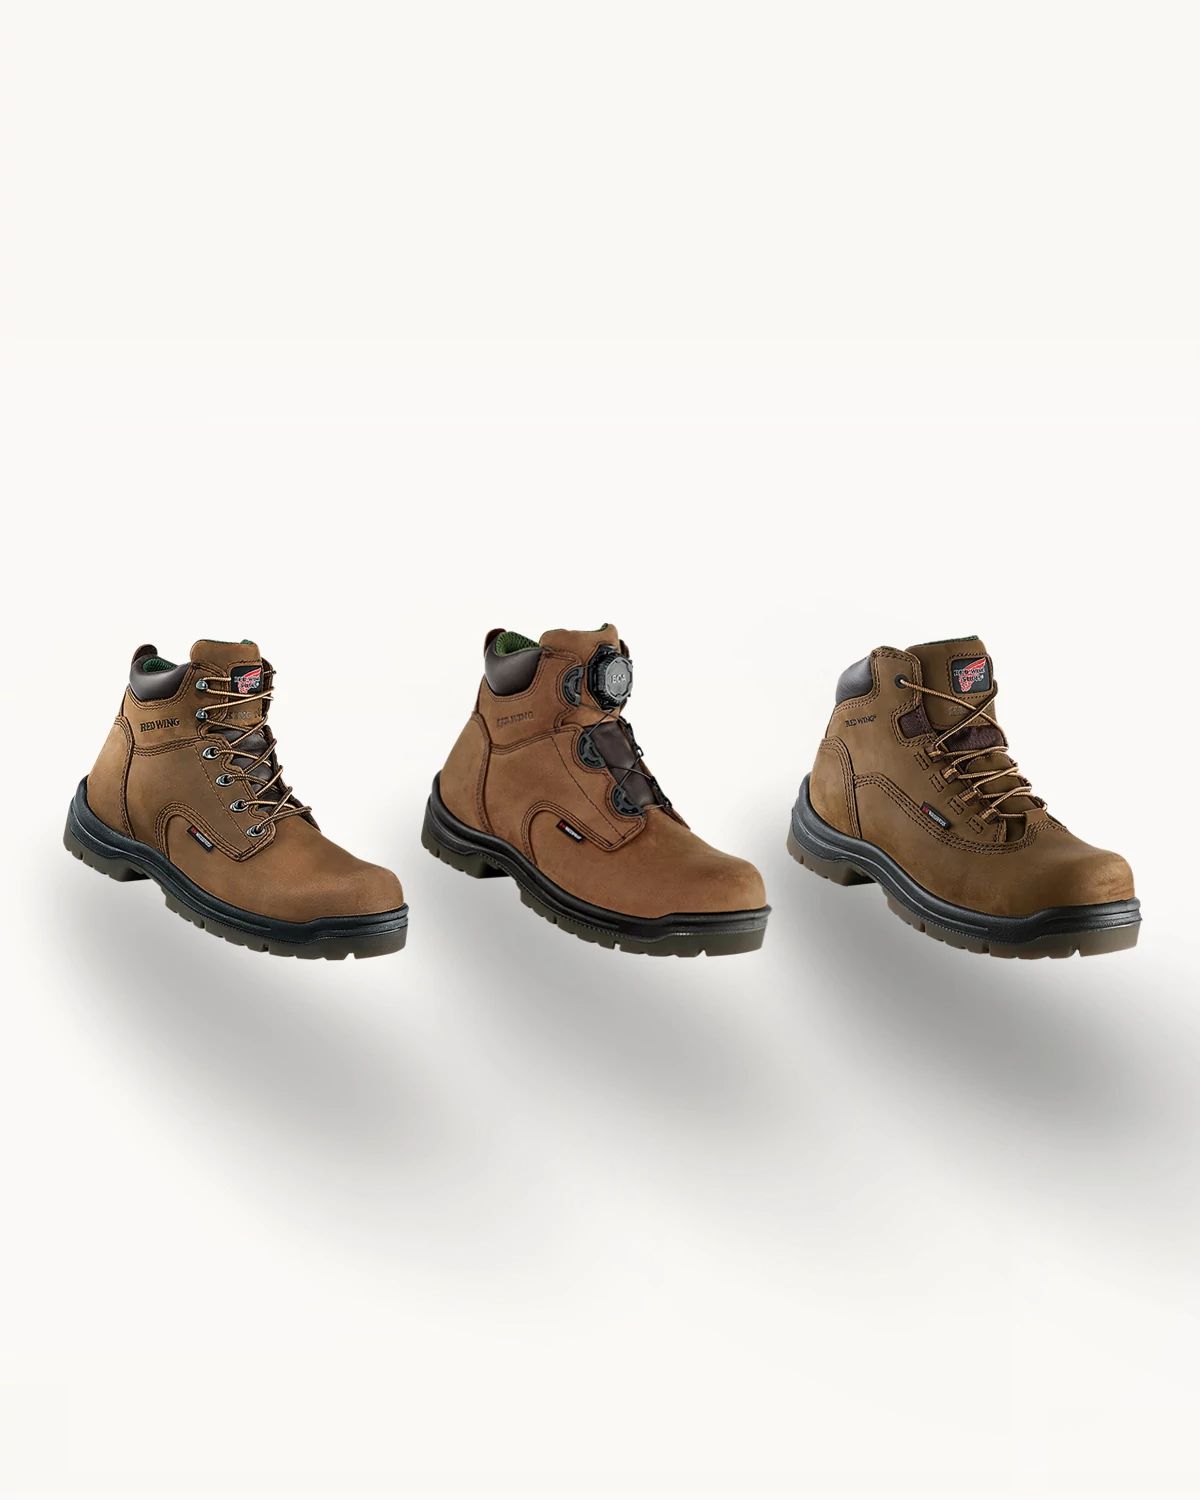 Four styles of Red Wing King Toe boots